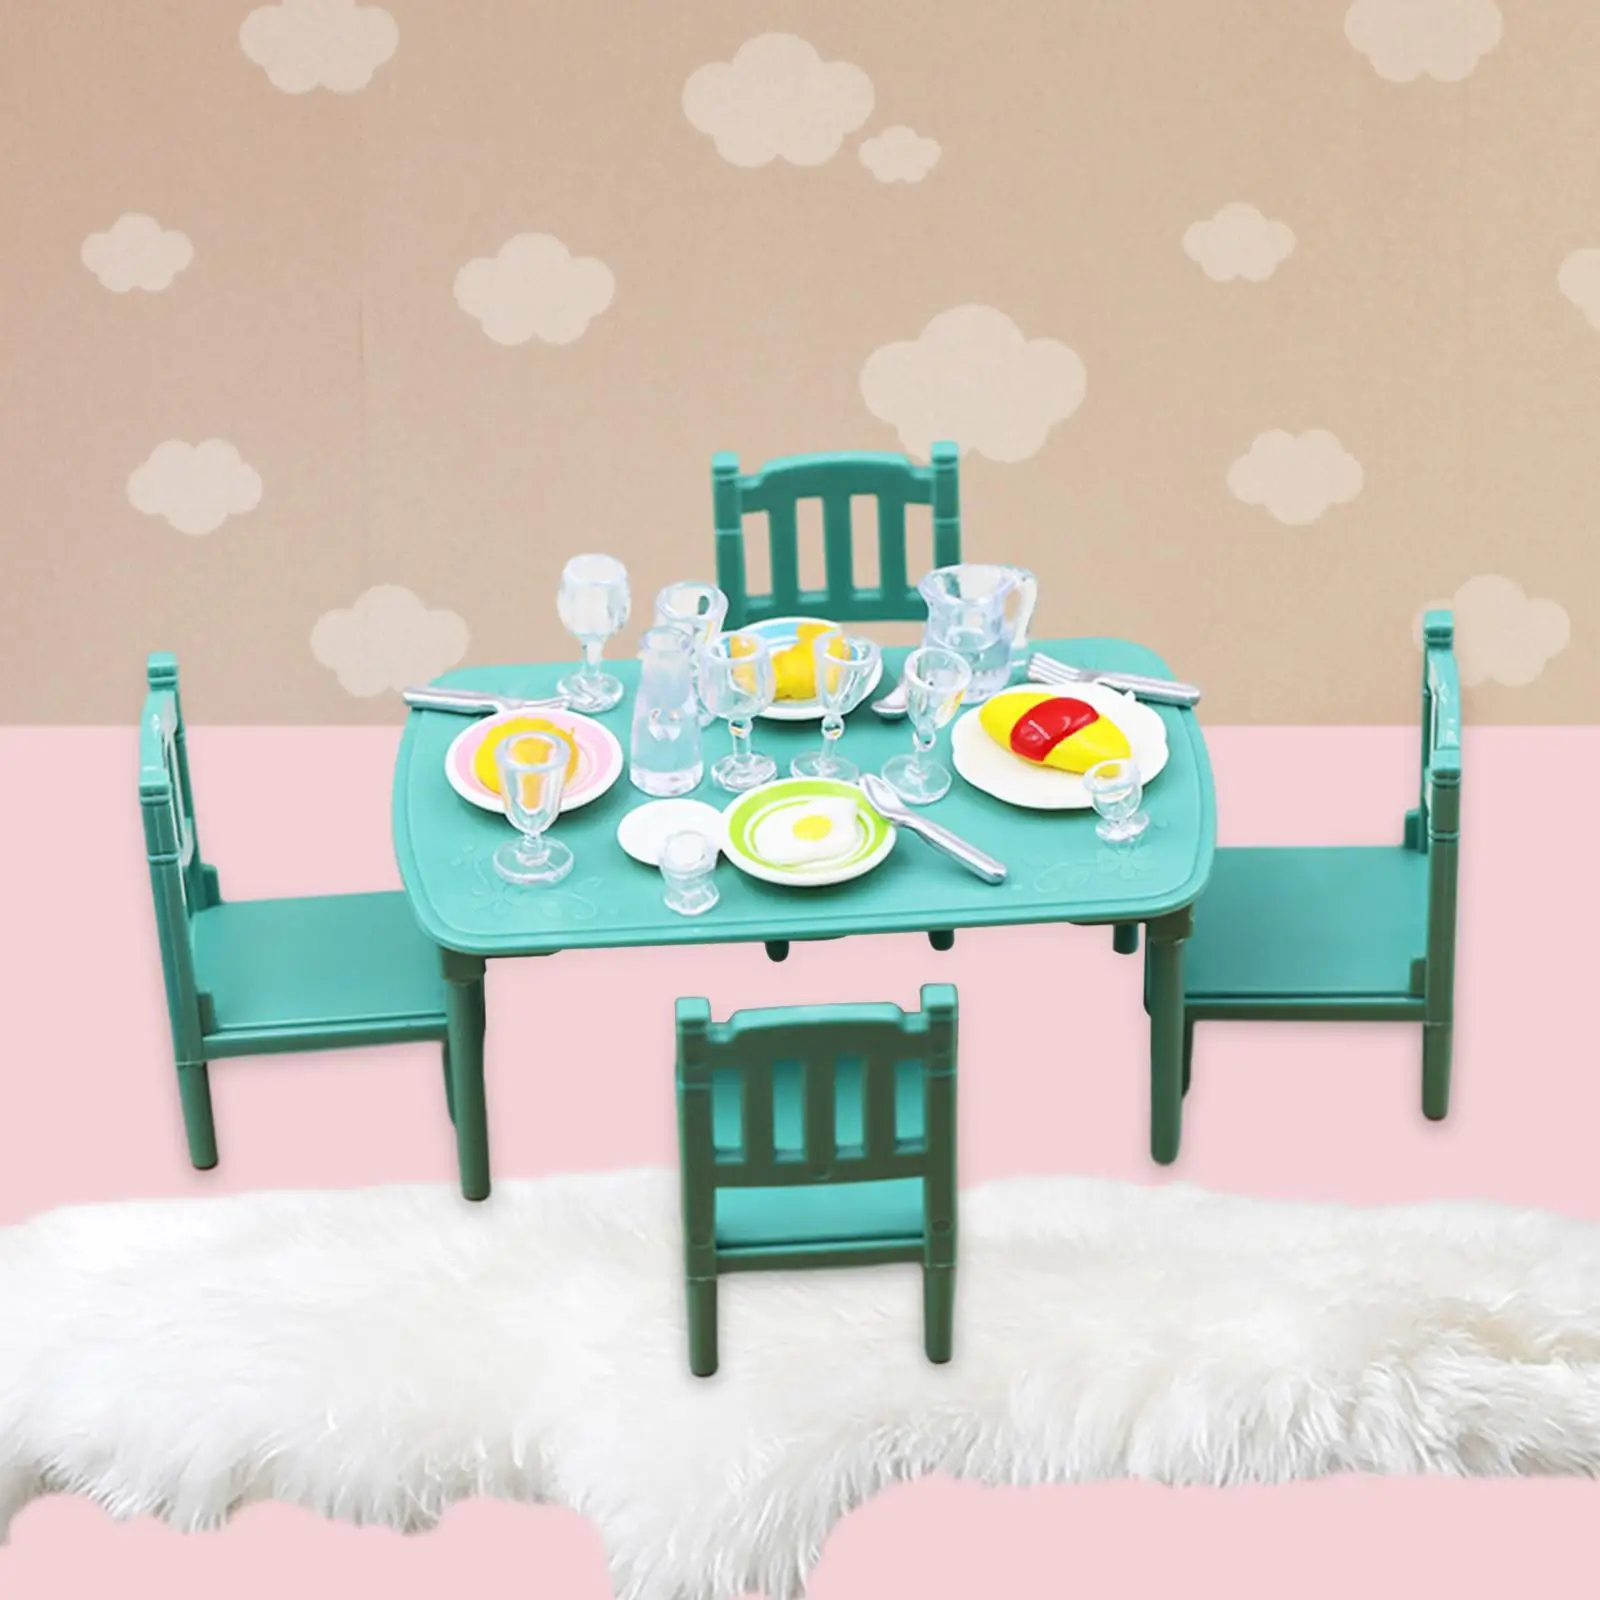 1:12 Dollhouse Dining Room Scenes Kids Valentines Gifts Dollhouse Furniture Simulation Kids Toys Dollhouse Table and Chair Model